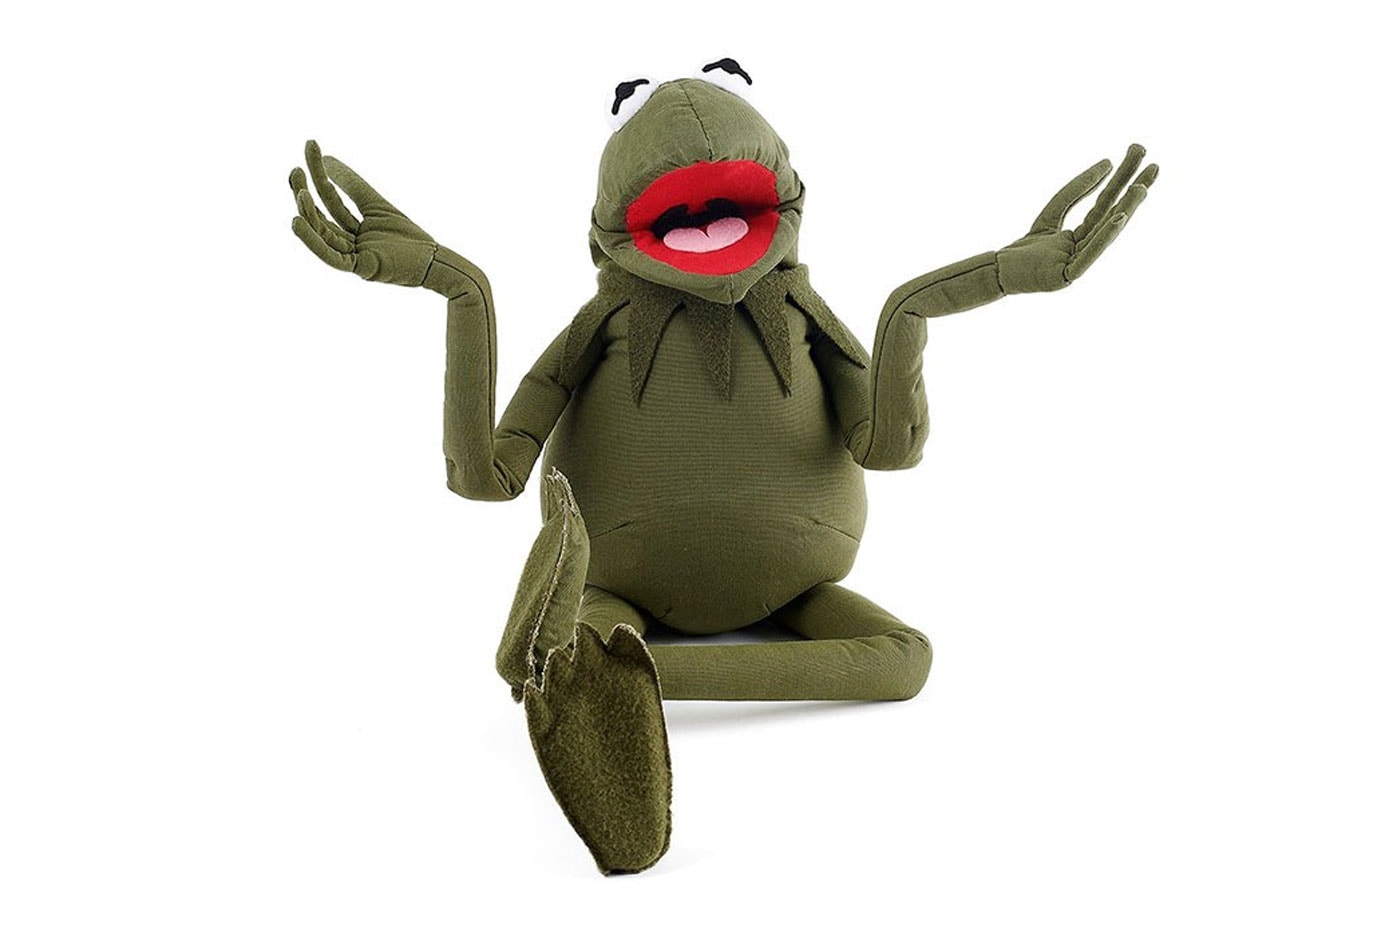 https://image-cdn.hypb.st/https%3A%2F%2Fhypebeast.com%2Fimage%2F2021%2F11%2Freadymade-disney-kermit-the-frog-the-muppets-release-info-002.jpg?cbr=1&q=90